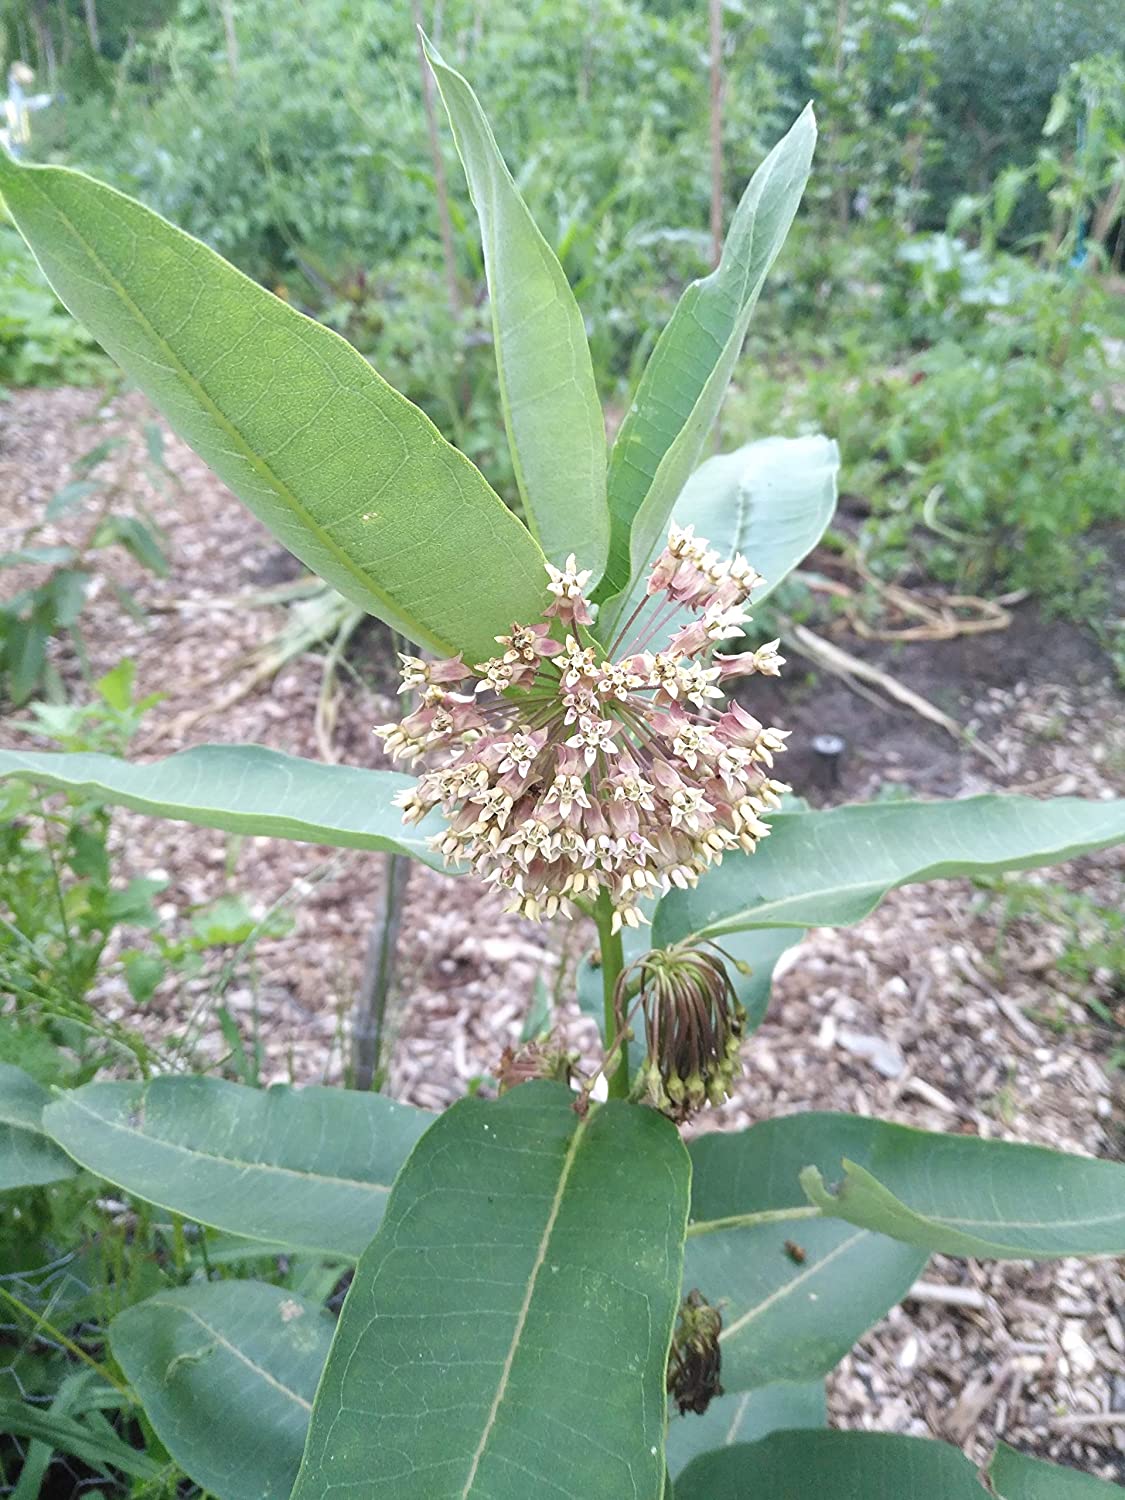 Hundredfold Common Milkweed Native Wild Flower 10 Grams of Seeds - Asclepias syriaca Milk Weed, Food Source for Monarch Caterpillar and Butterfly